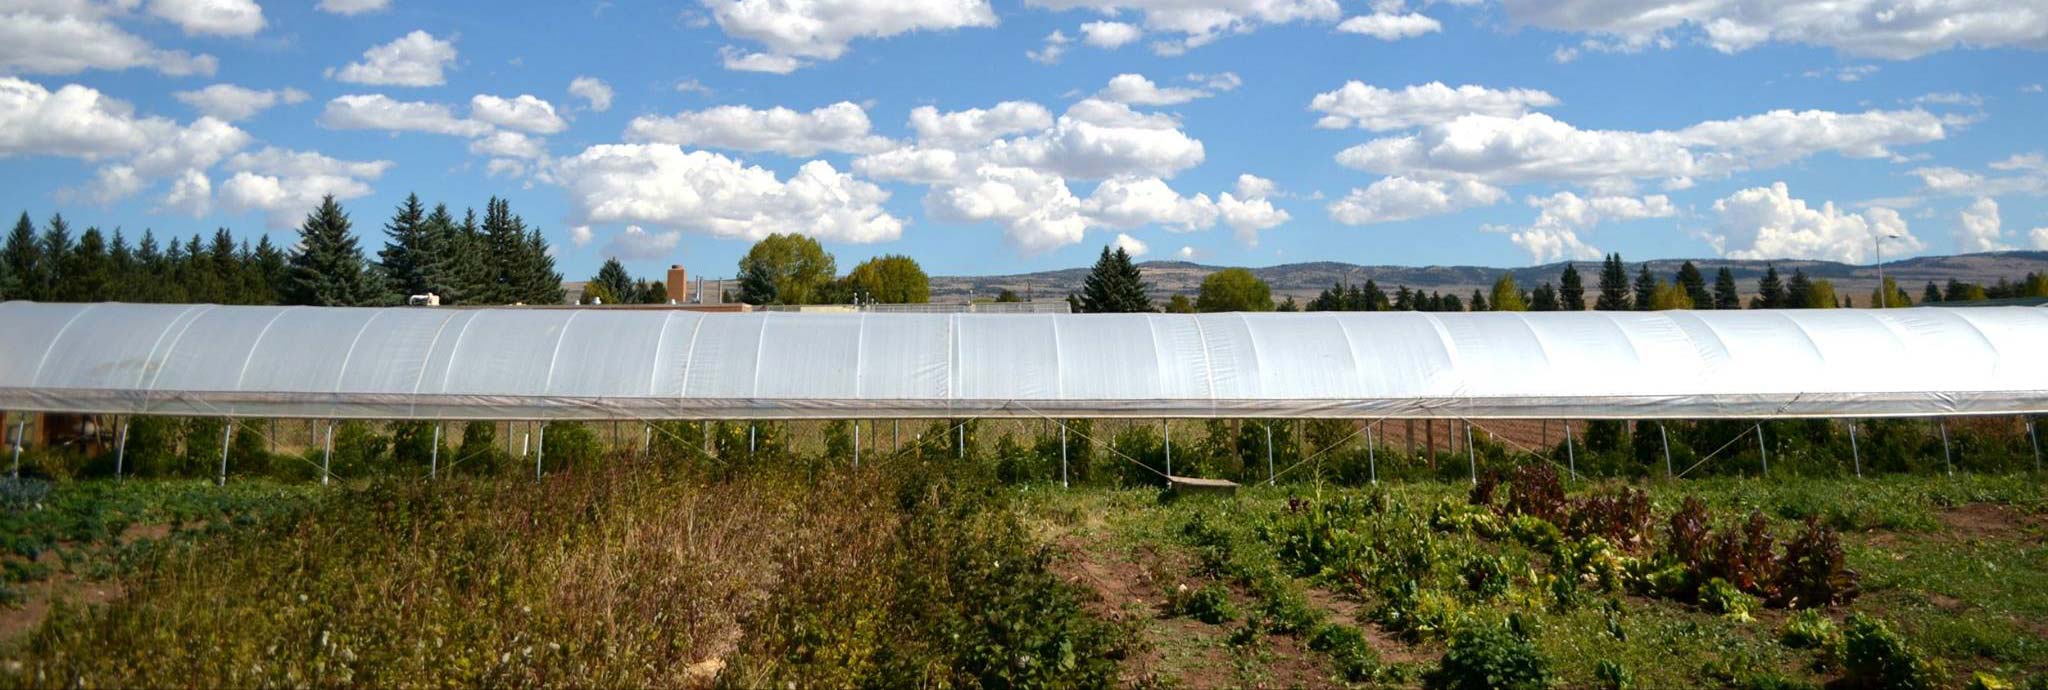 side view of a long hoop house